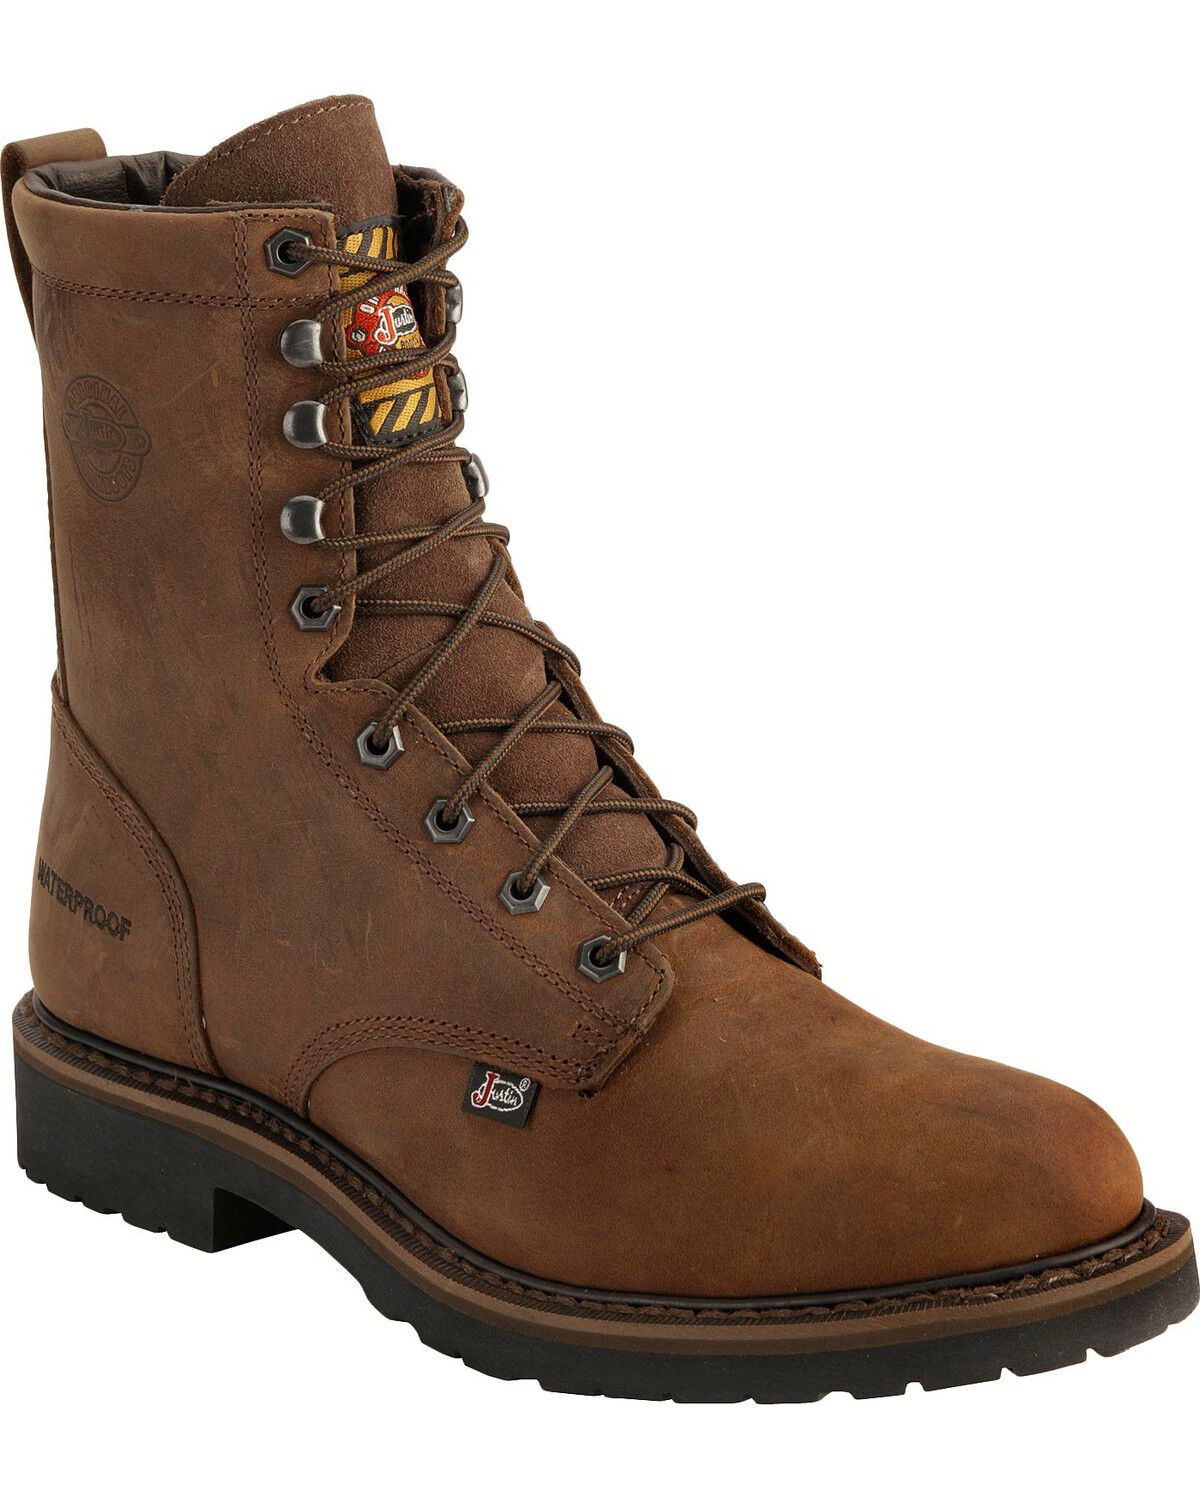 8 inch lace up work boots